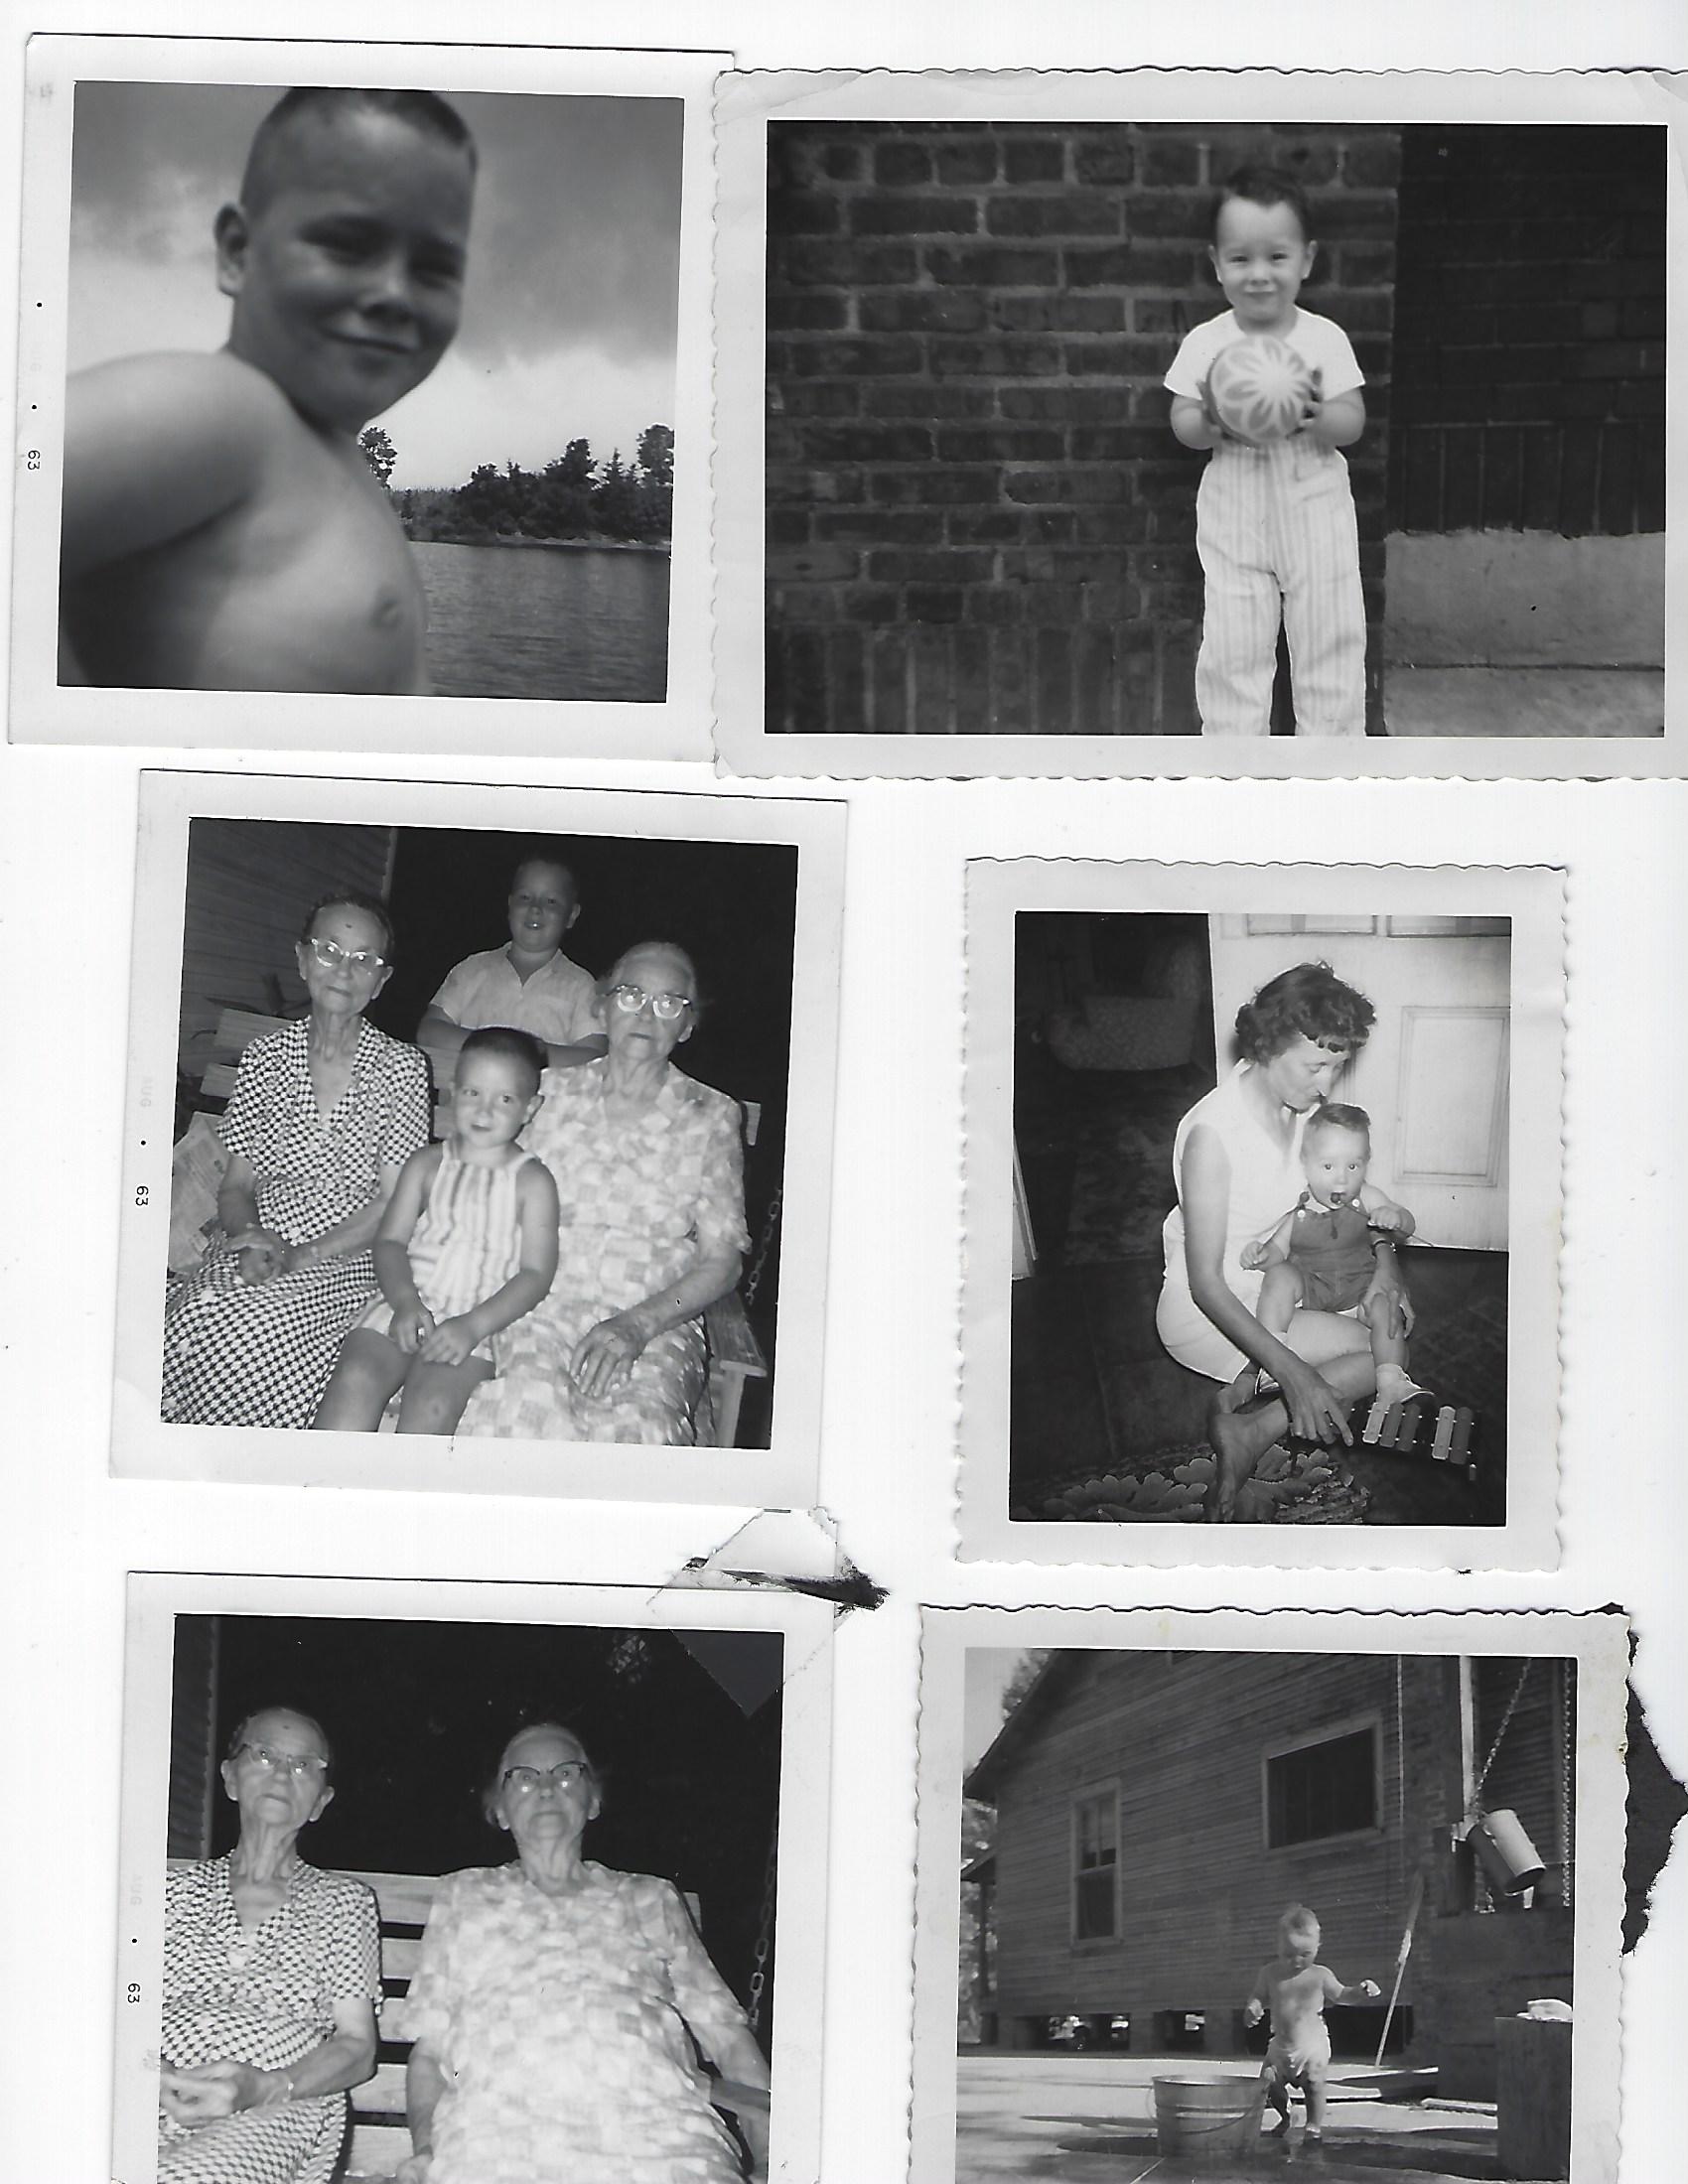 Old photographs of a young boy and his grandmother